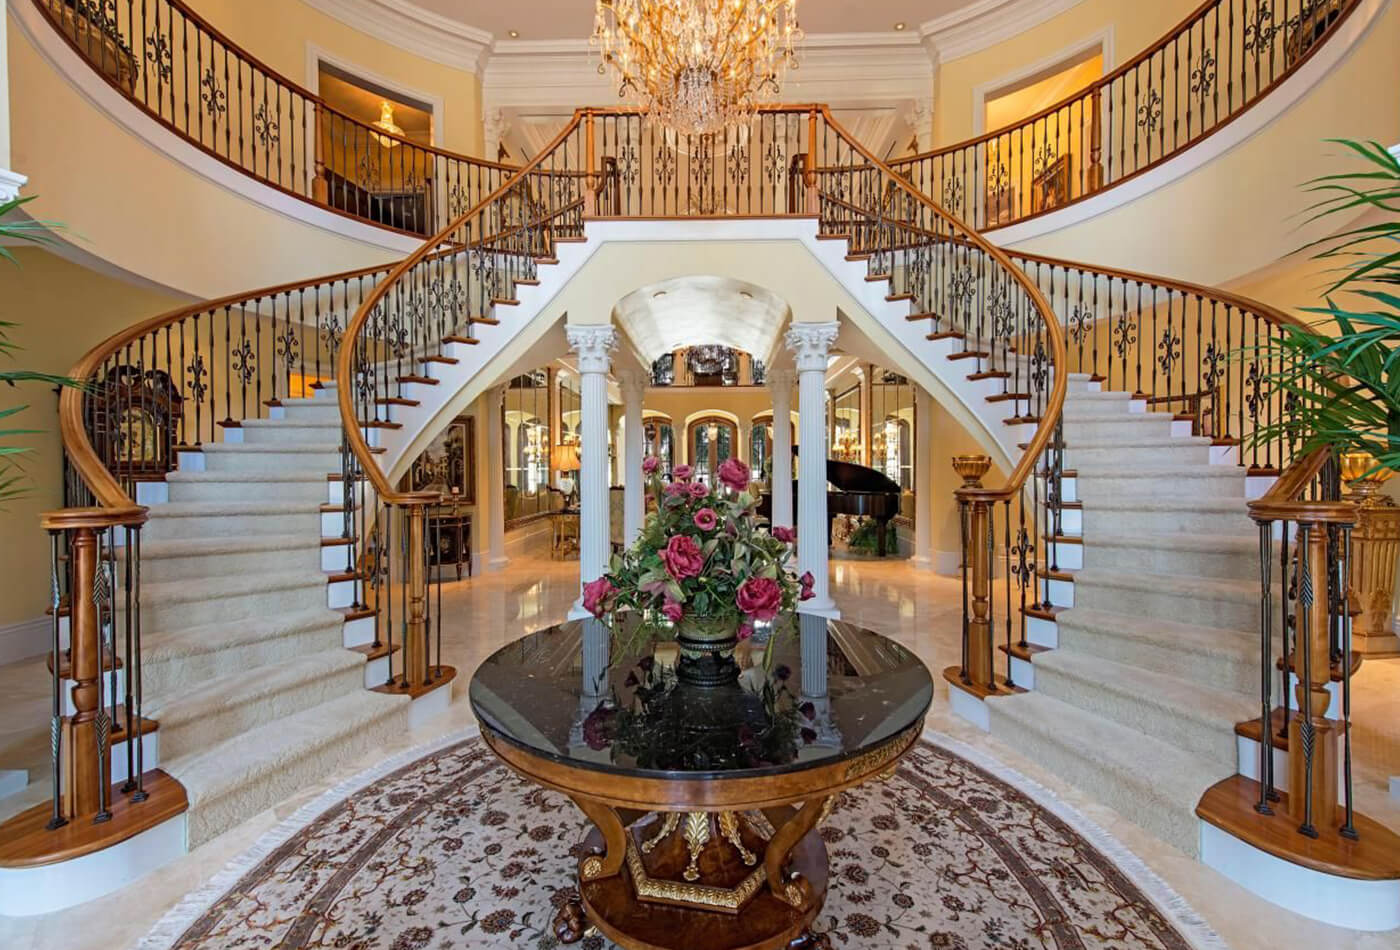 Explore These Foyer Design Ideas For A Warm Welcome Space